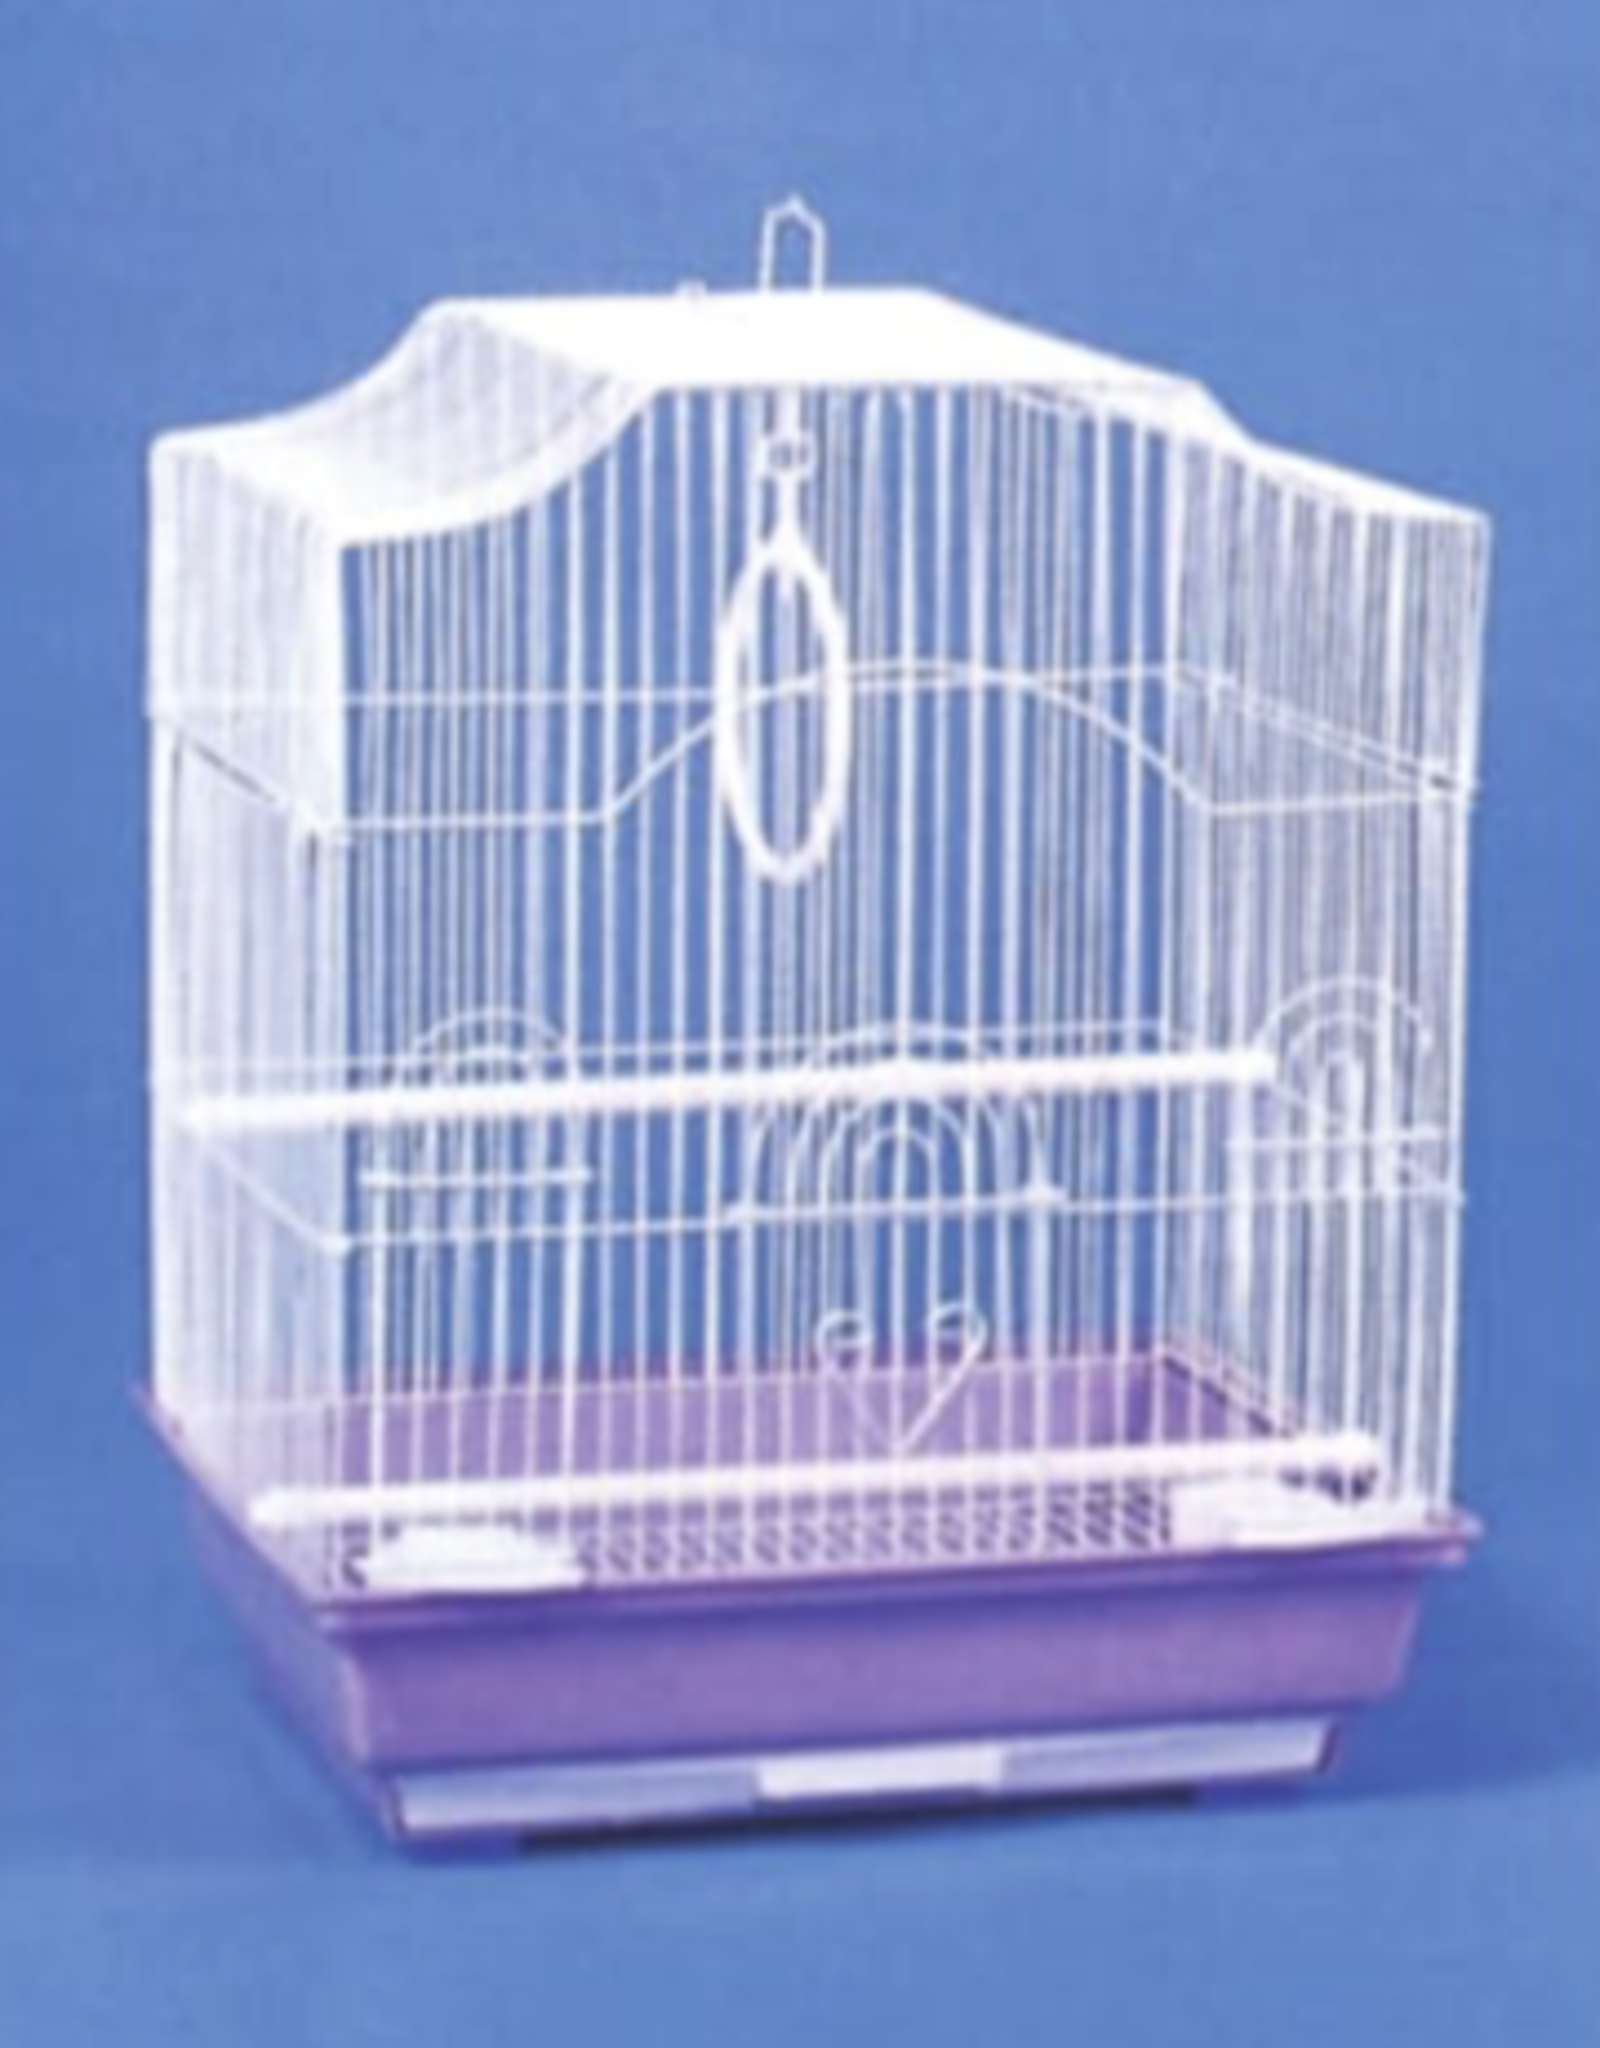 HQ HQ- 1338- BIRD CAGE- BARN TOP- 14X11- ASSORTED COLORS